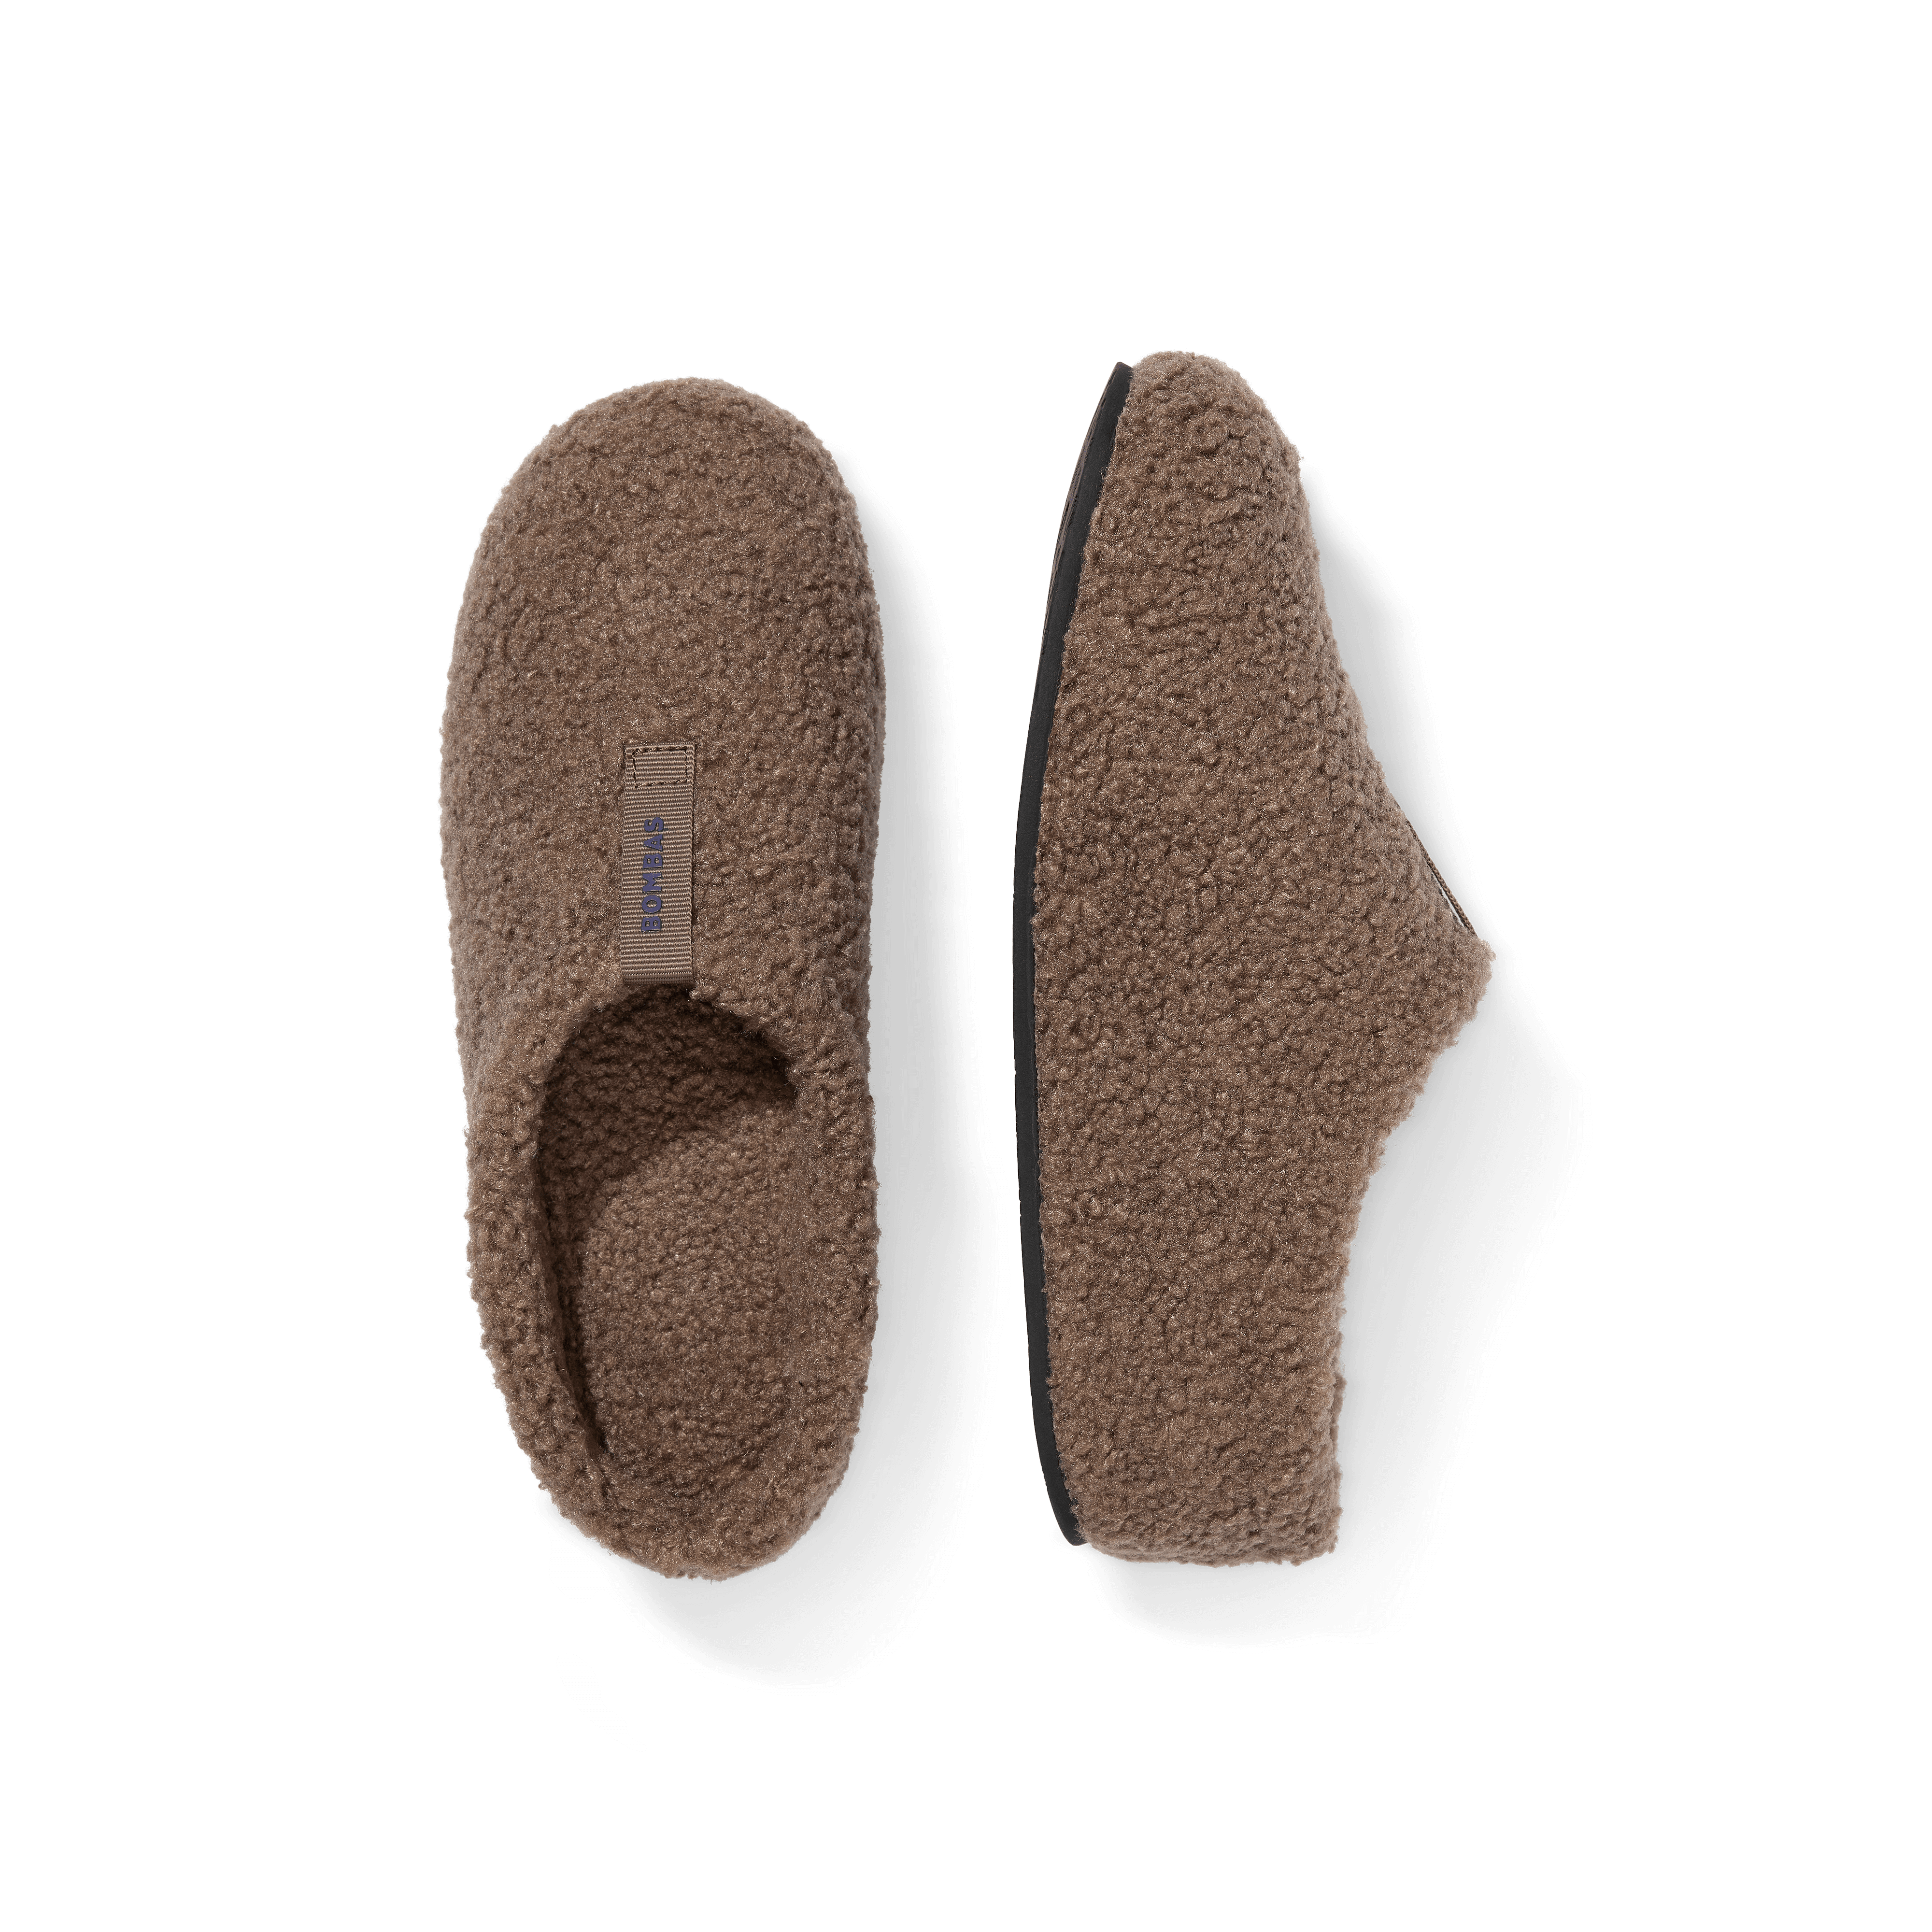 Introducing: All Our New Slippers - Bombas